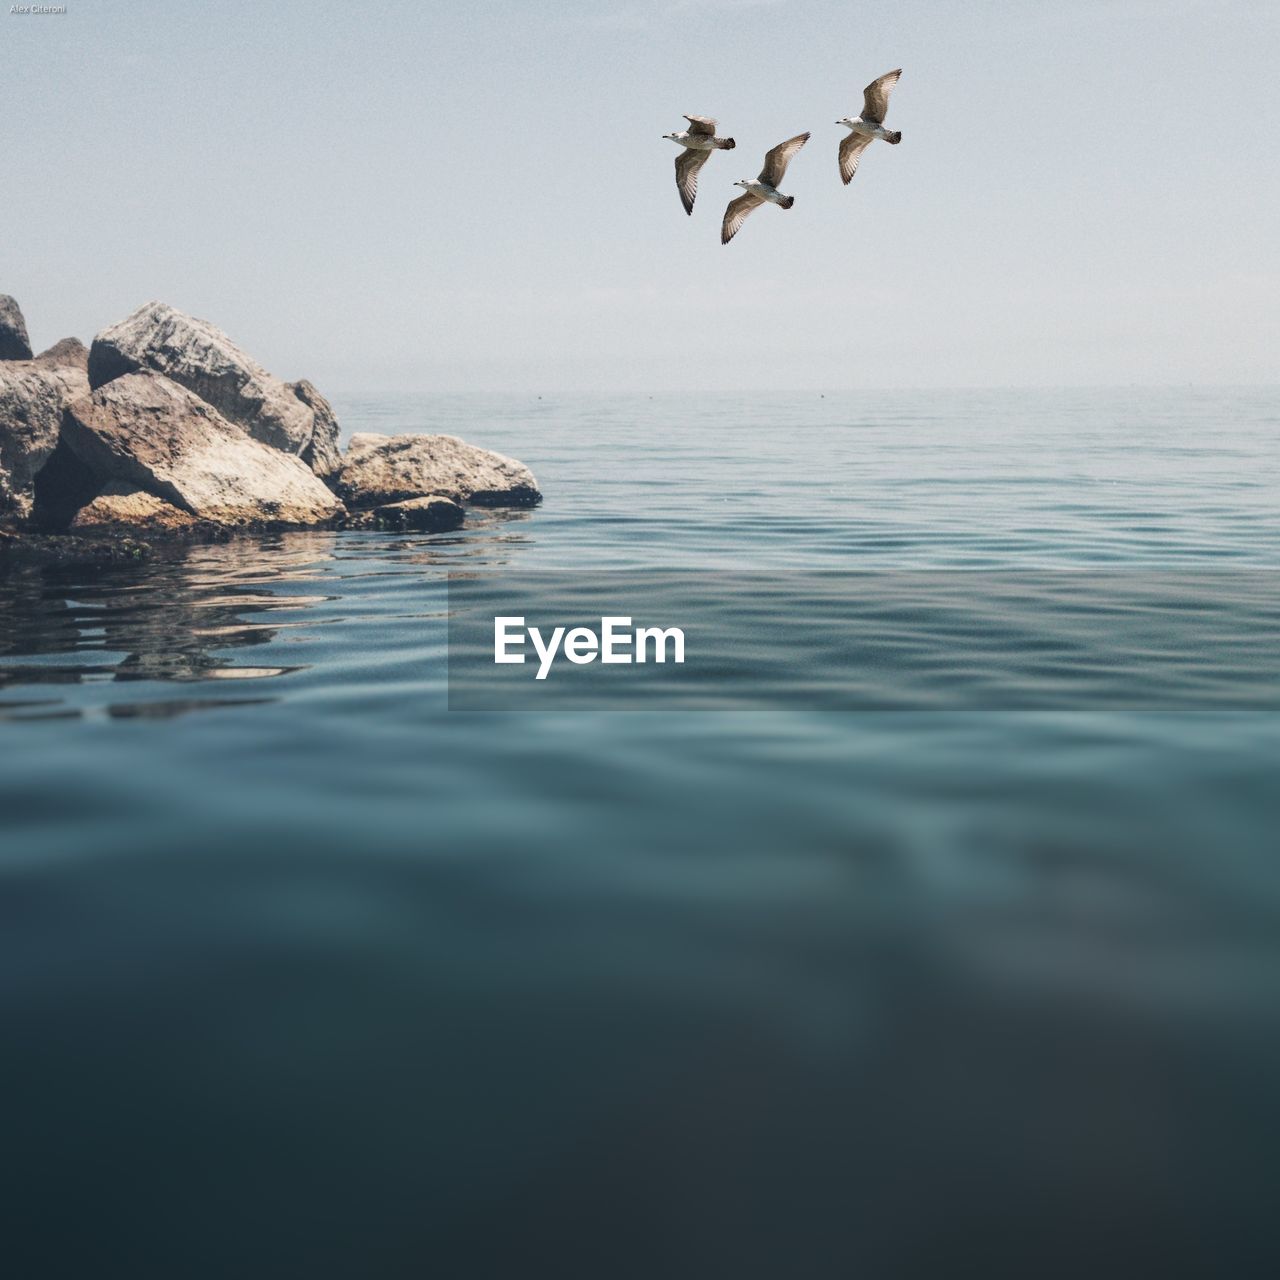 View of birds in sea